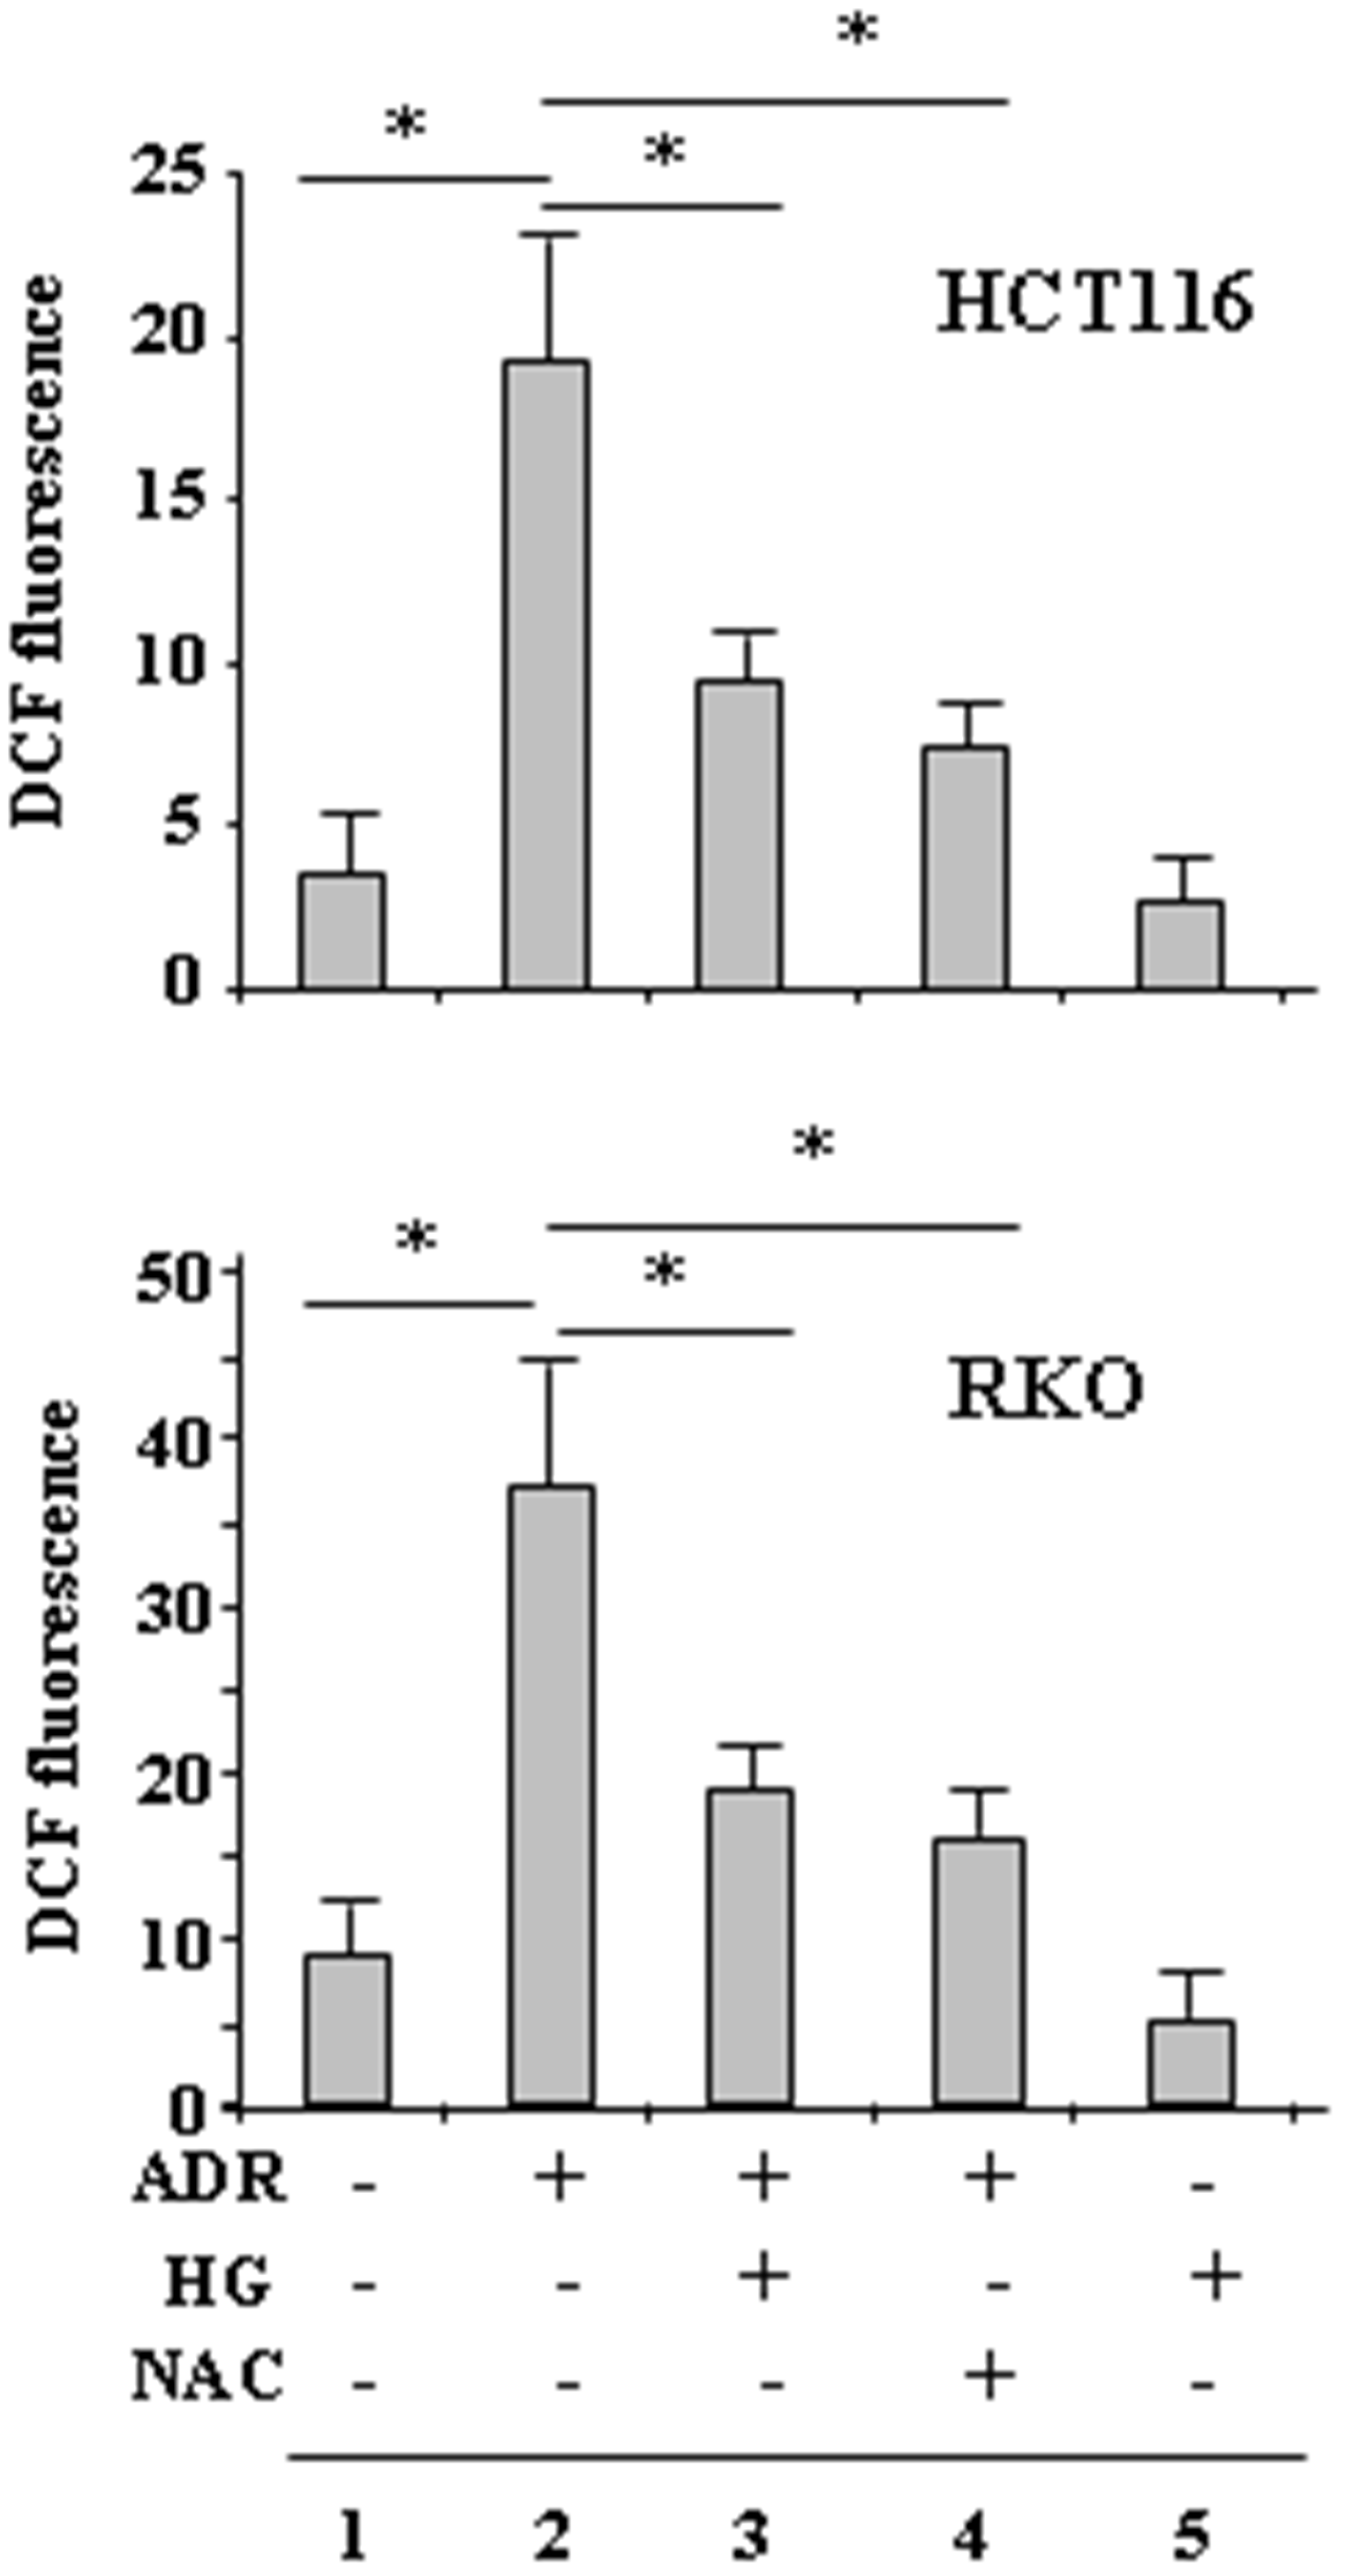 HG reduces ADR-induced ROS generation.